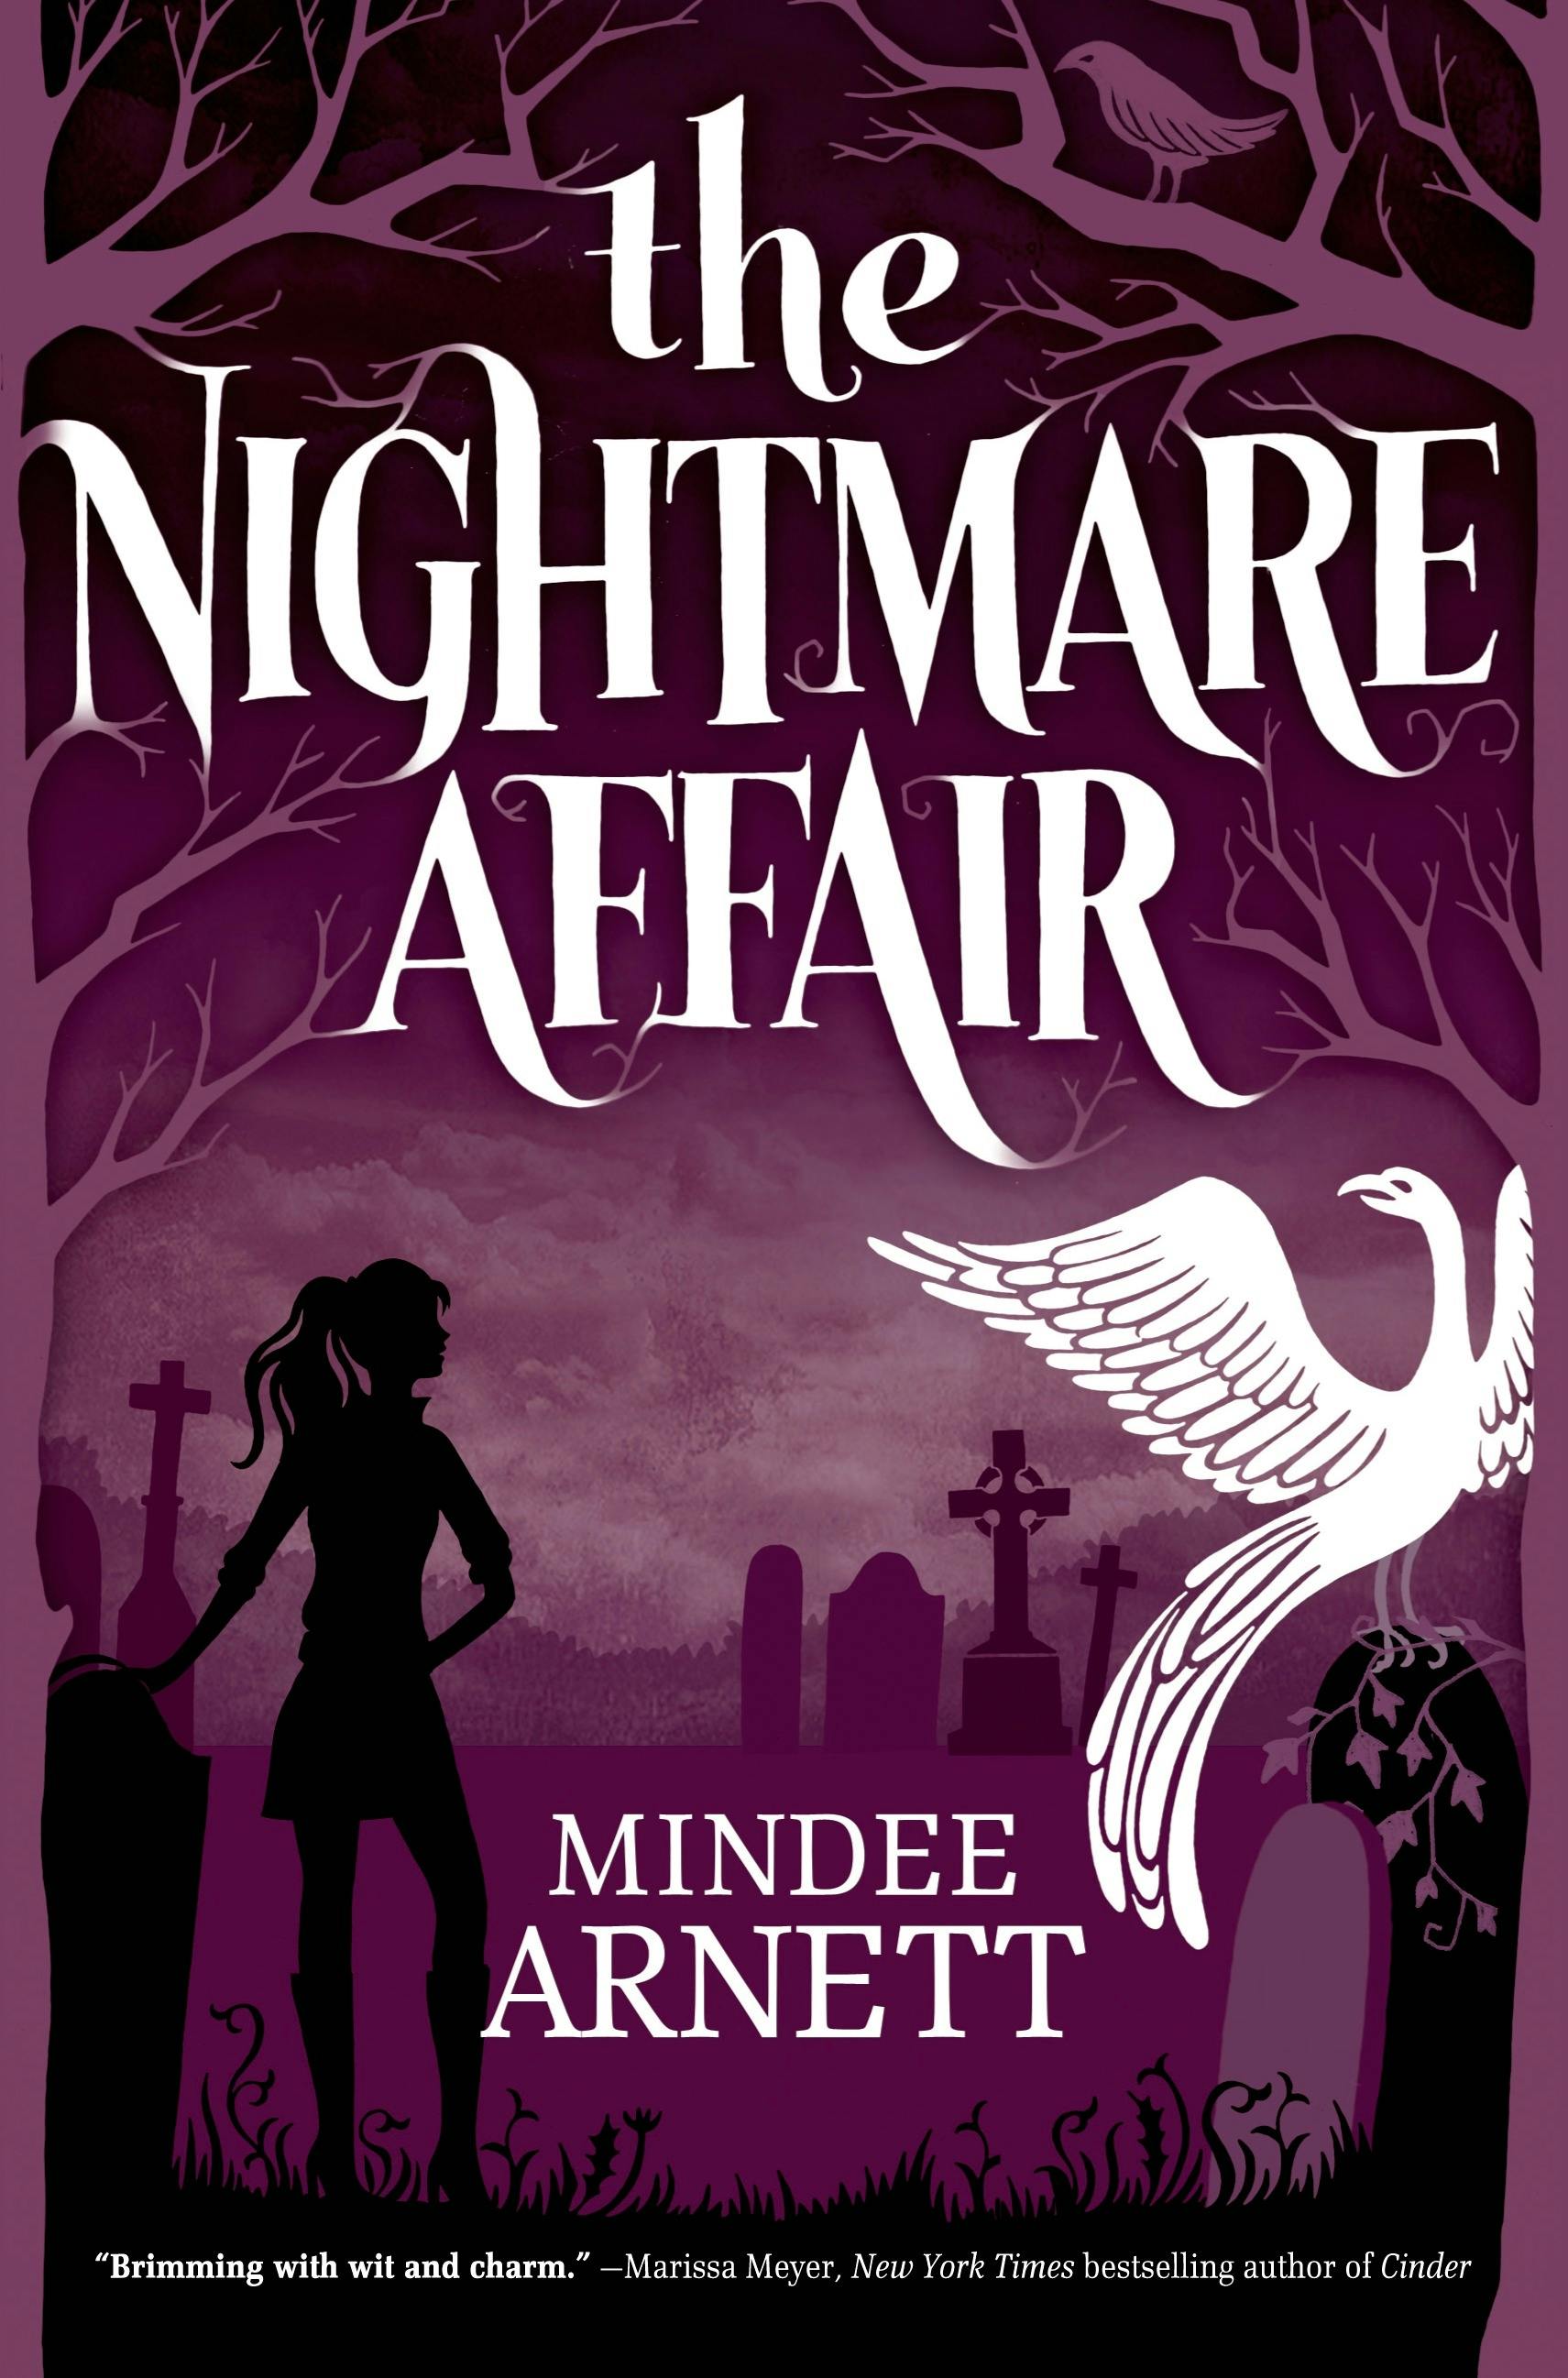 Cover for the book titled as: The Nightmare Affair